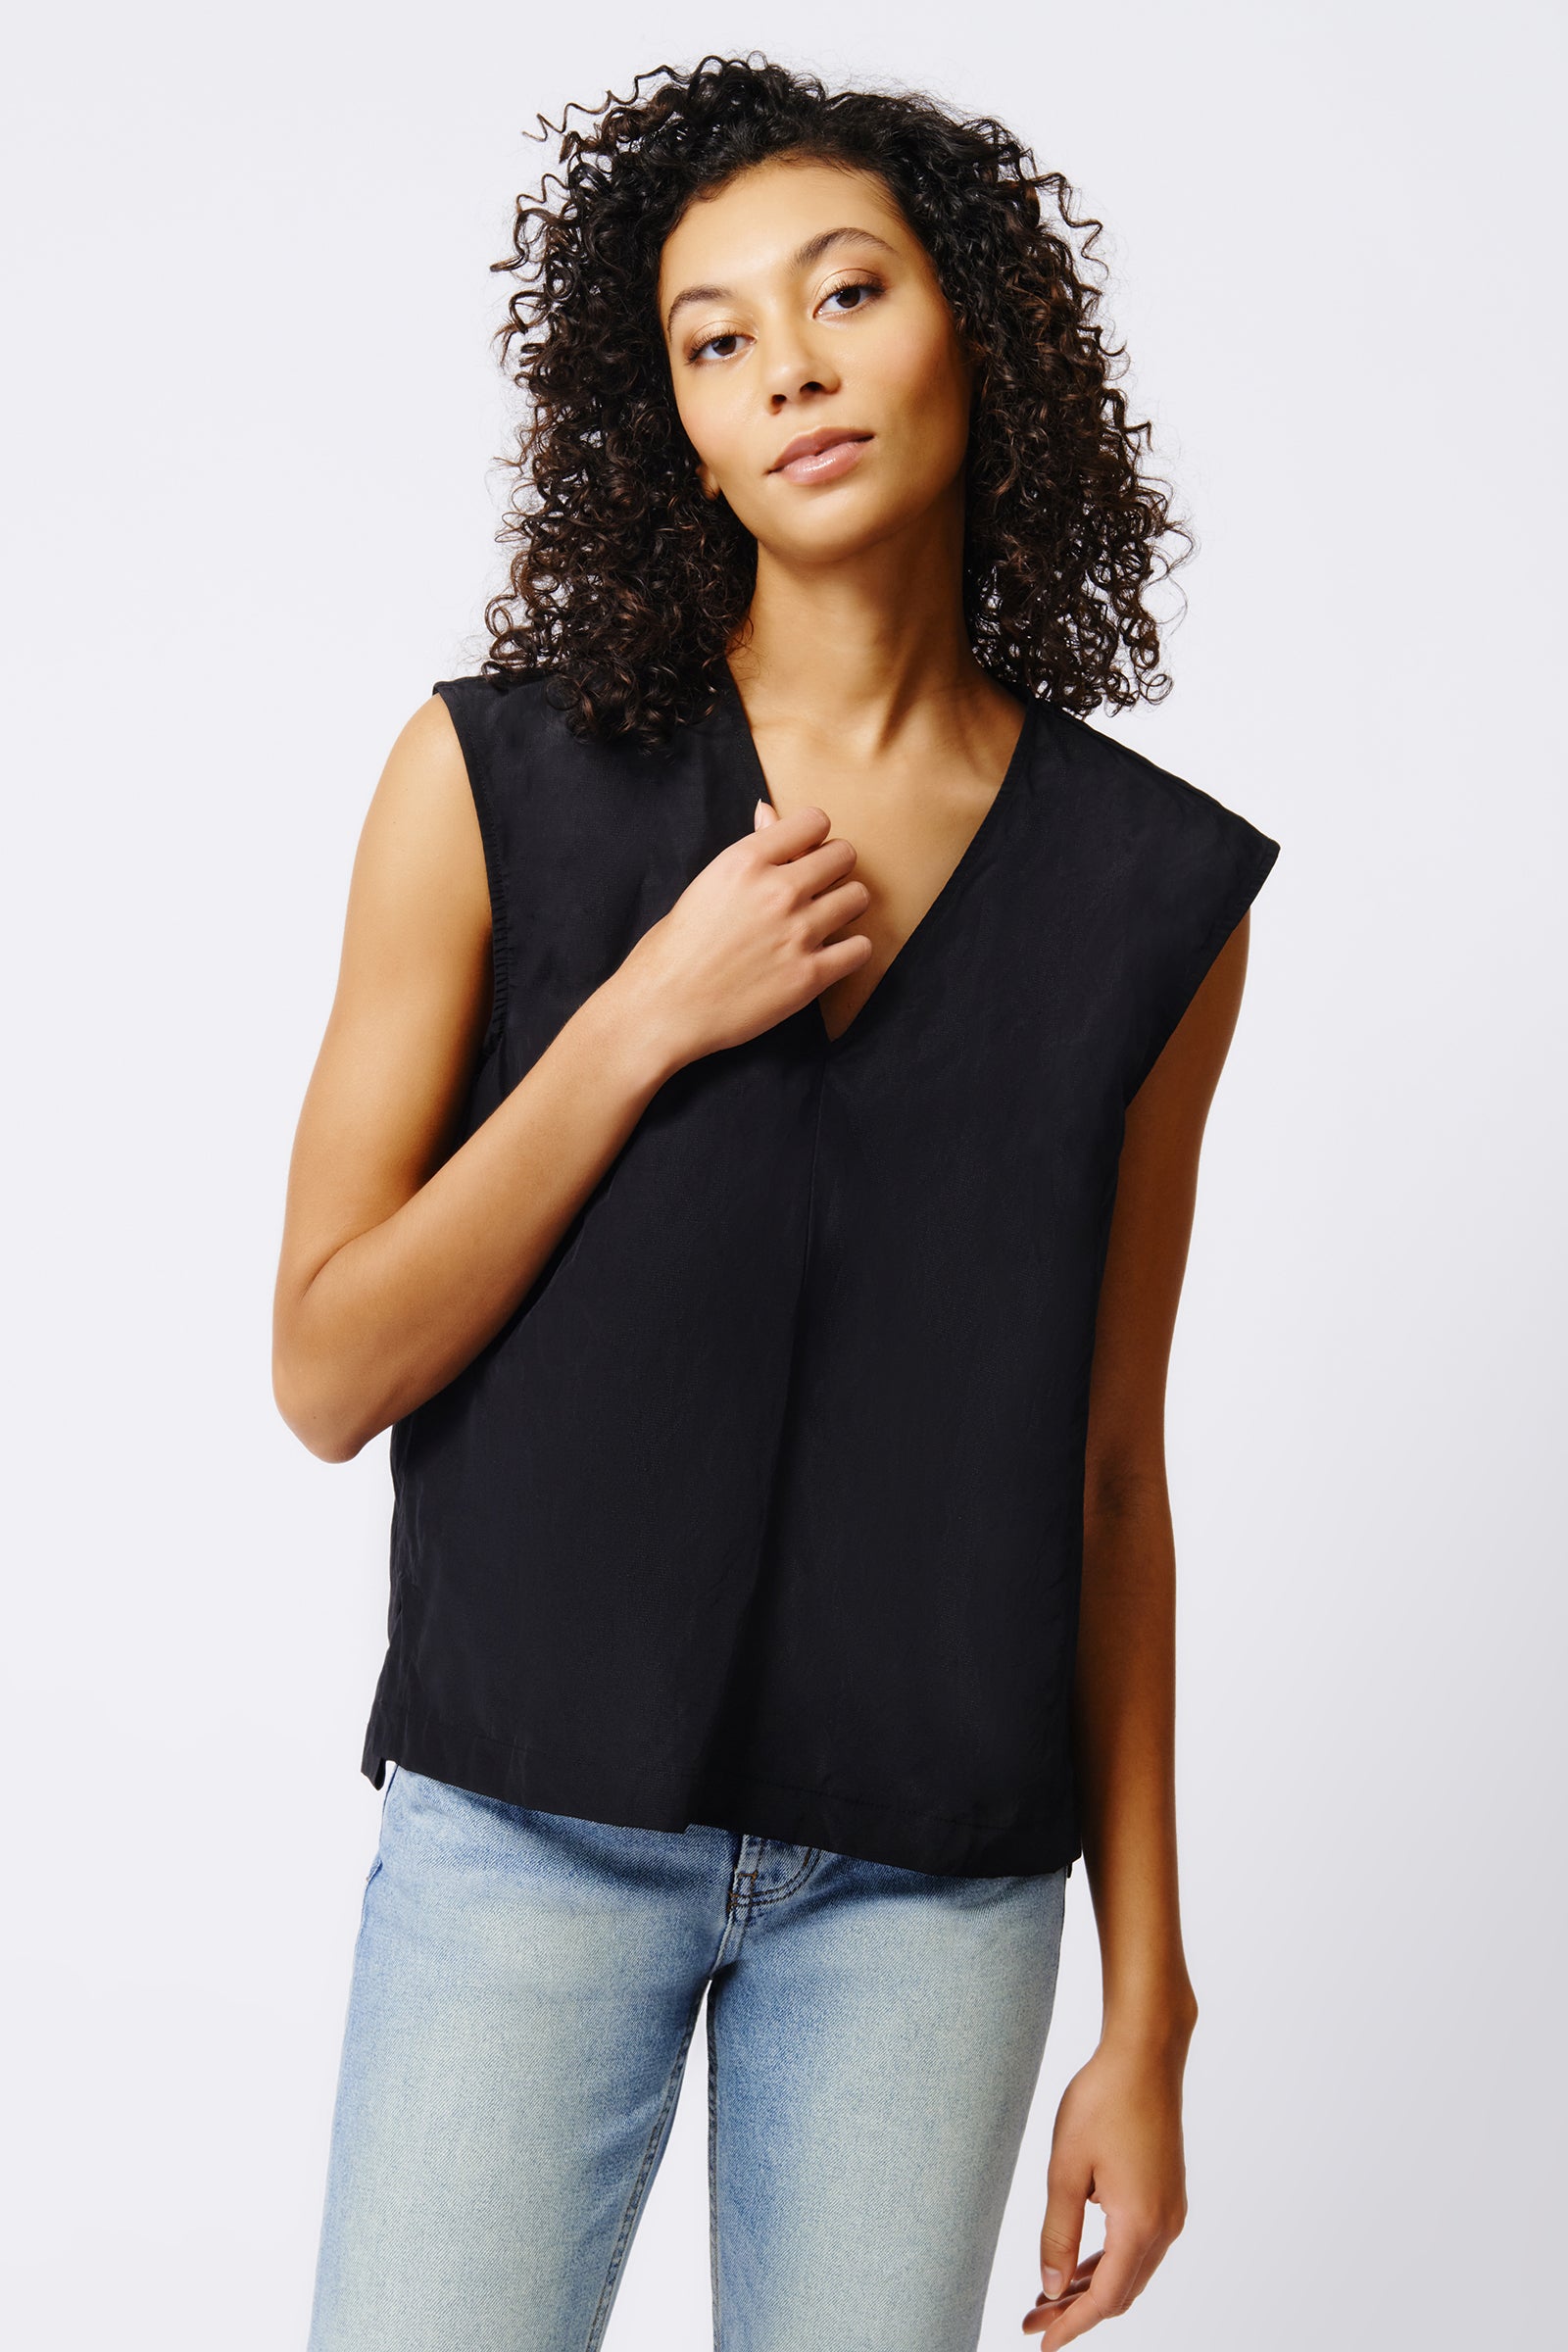 Kal Rieman Ava V Neck Shell in Black on Model Front View Crop 4